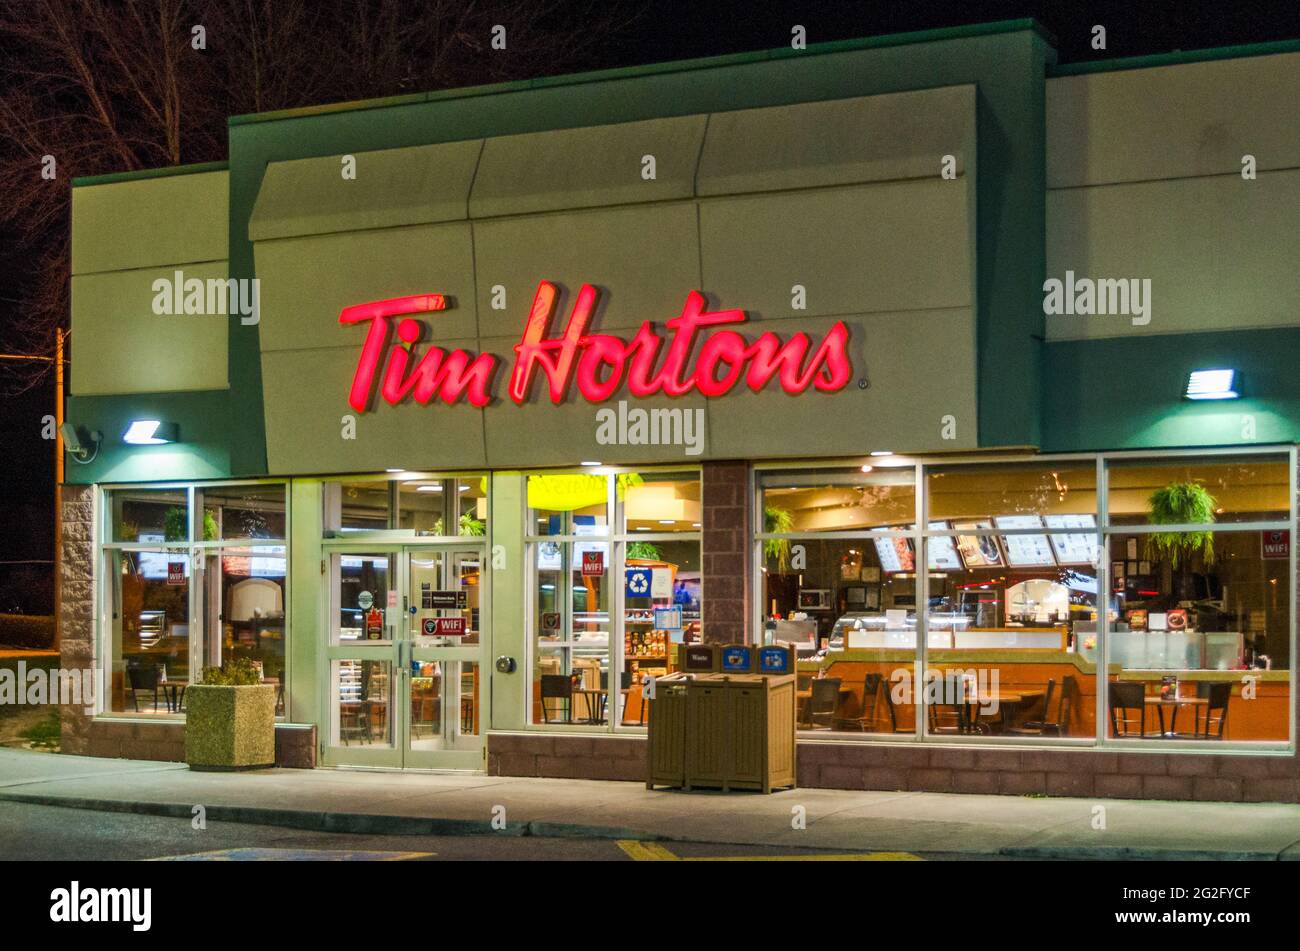 Tim Horton's restaurant during a Winter night with snow. Tim Hortons Inc is a Canadian multinational fast-casual restaurant known for its coffee and d Stock Photo